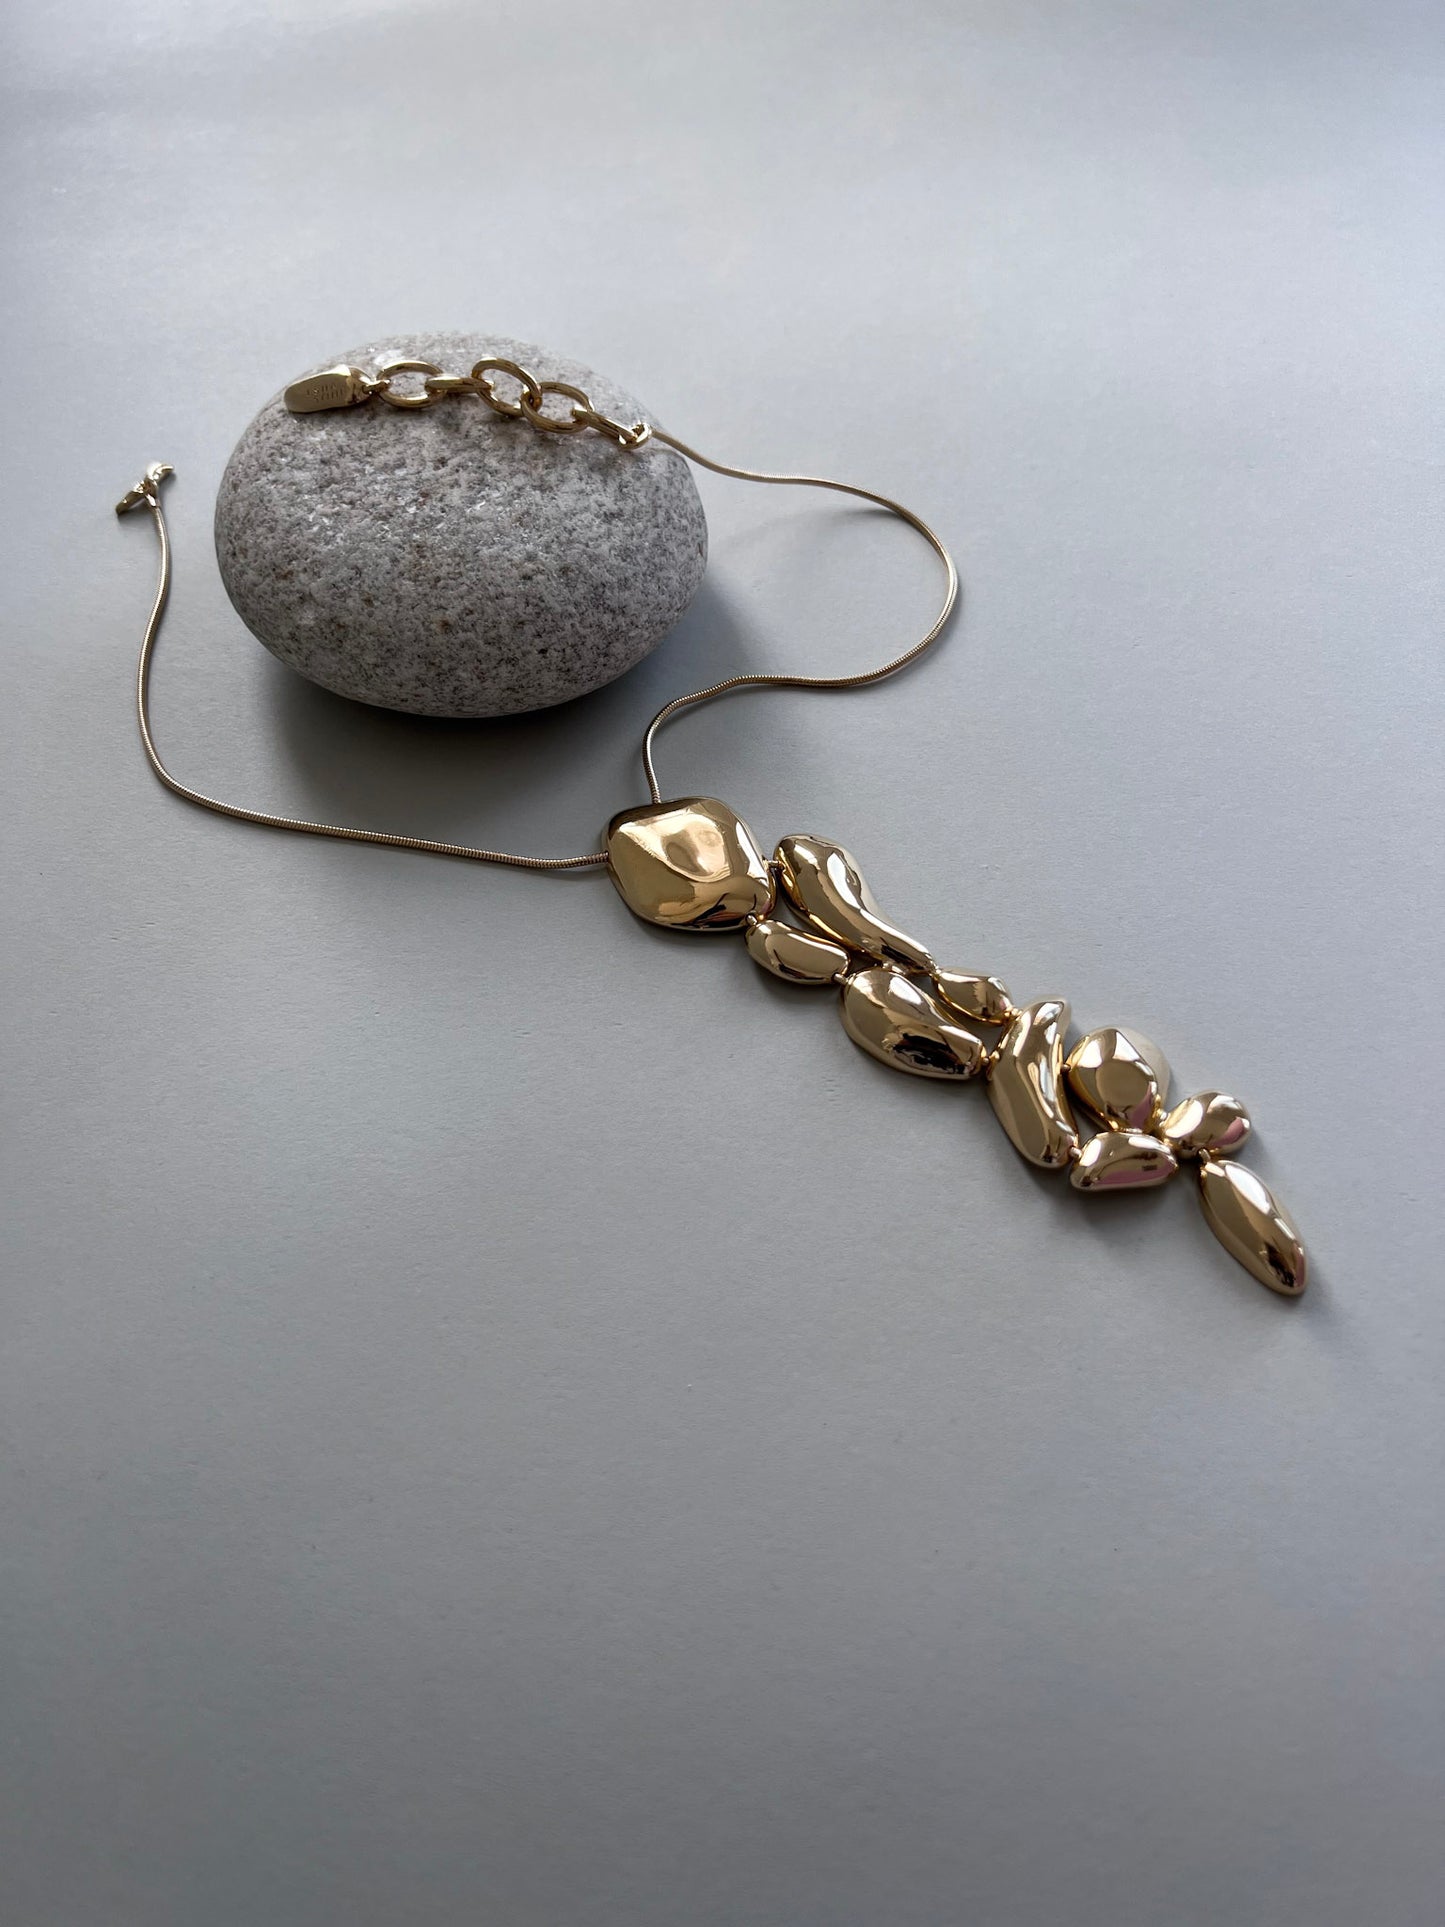 The River Rocks Necklace